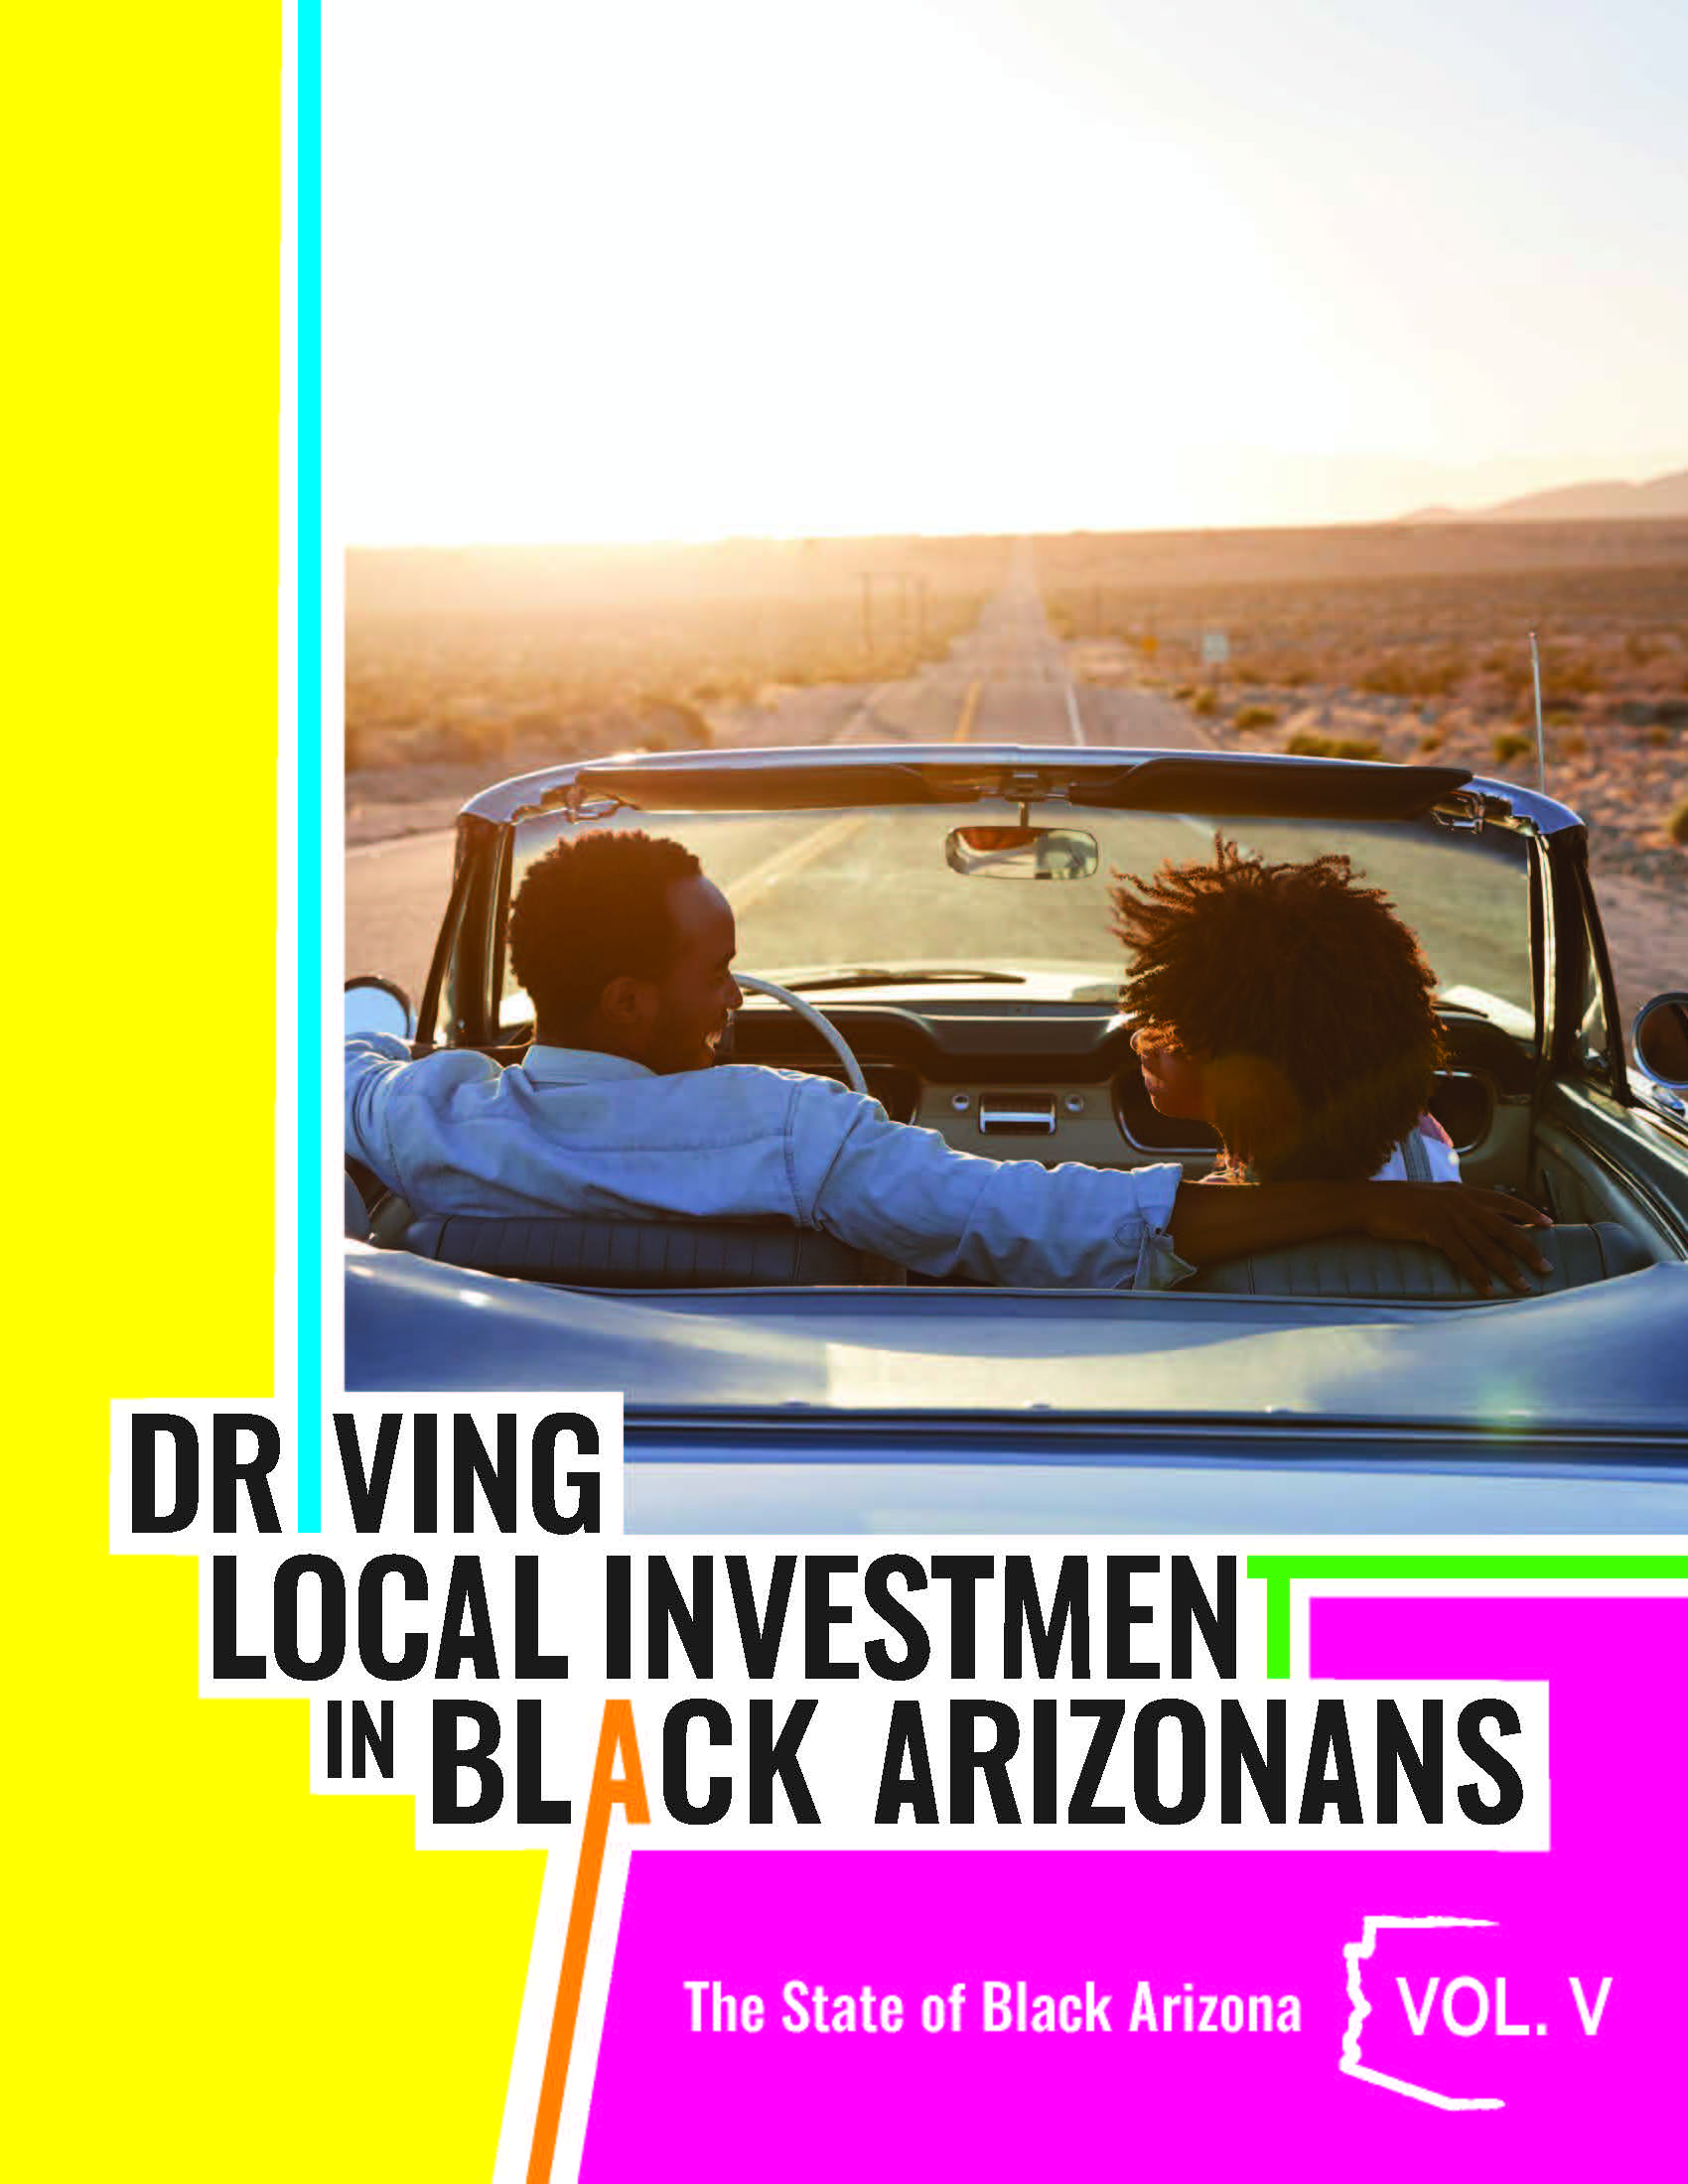 State of Black Arizona Volume V has been released!